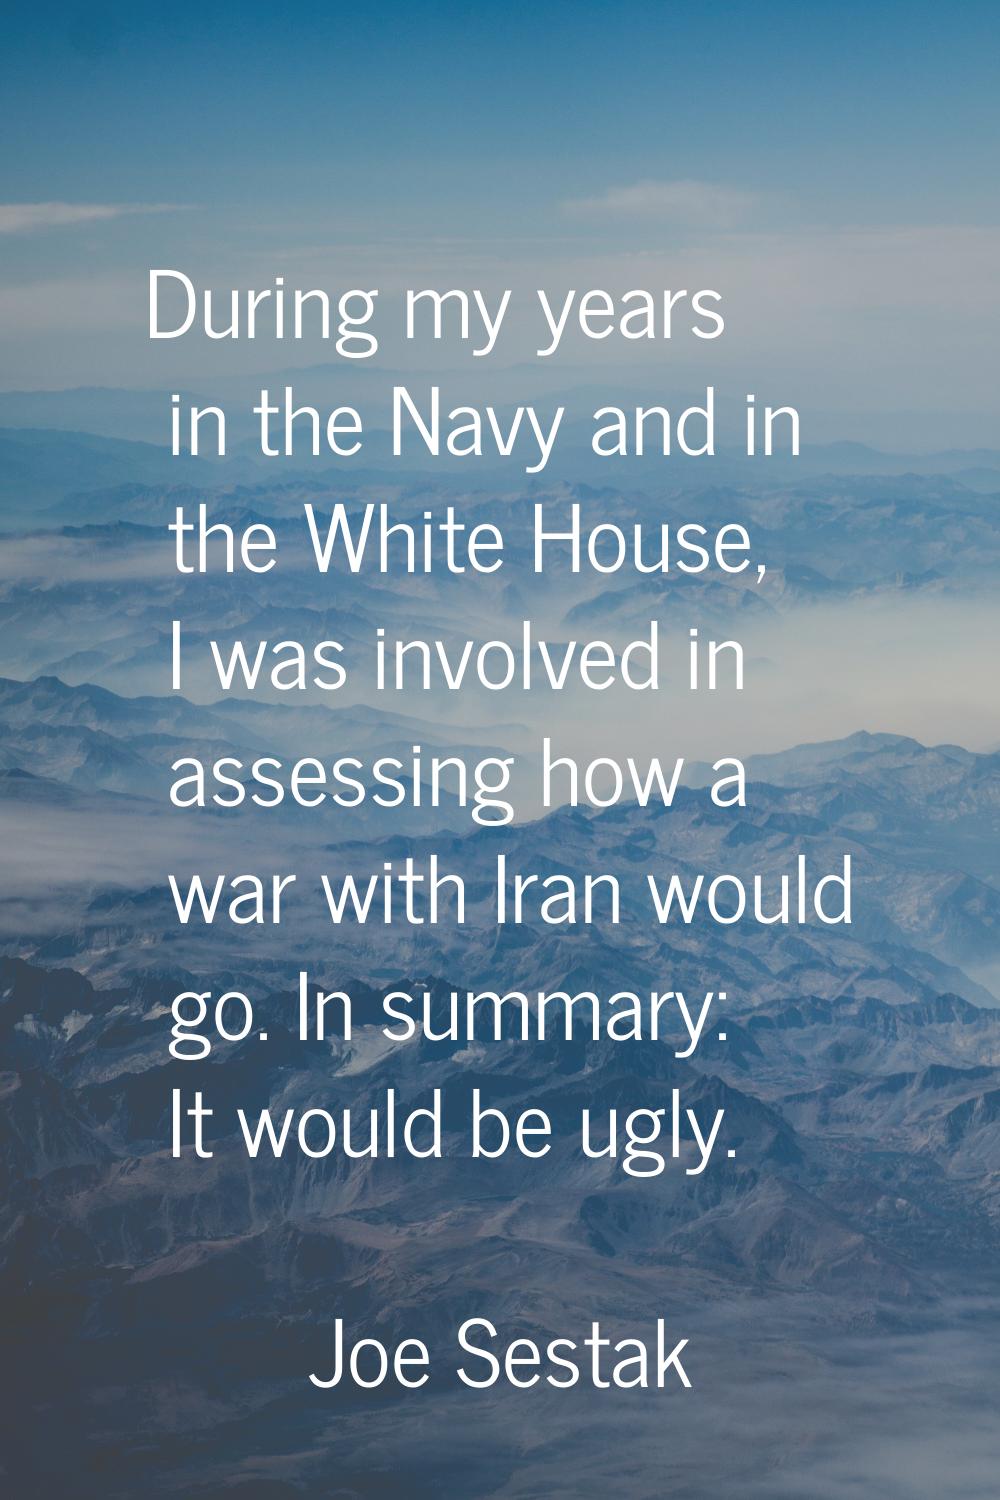 During my years in the Navy and in the White House, I was involved in assessing how a war with Iran